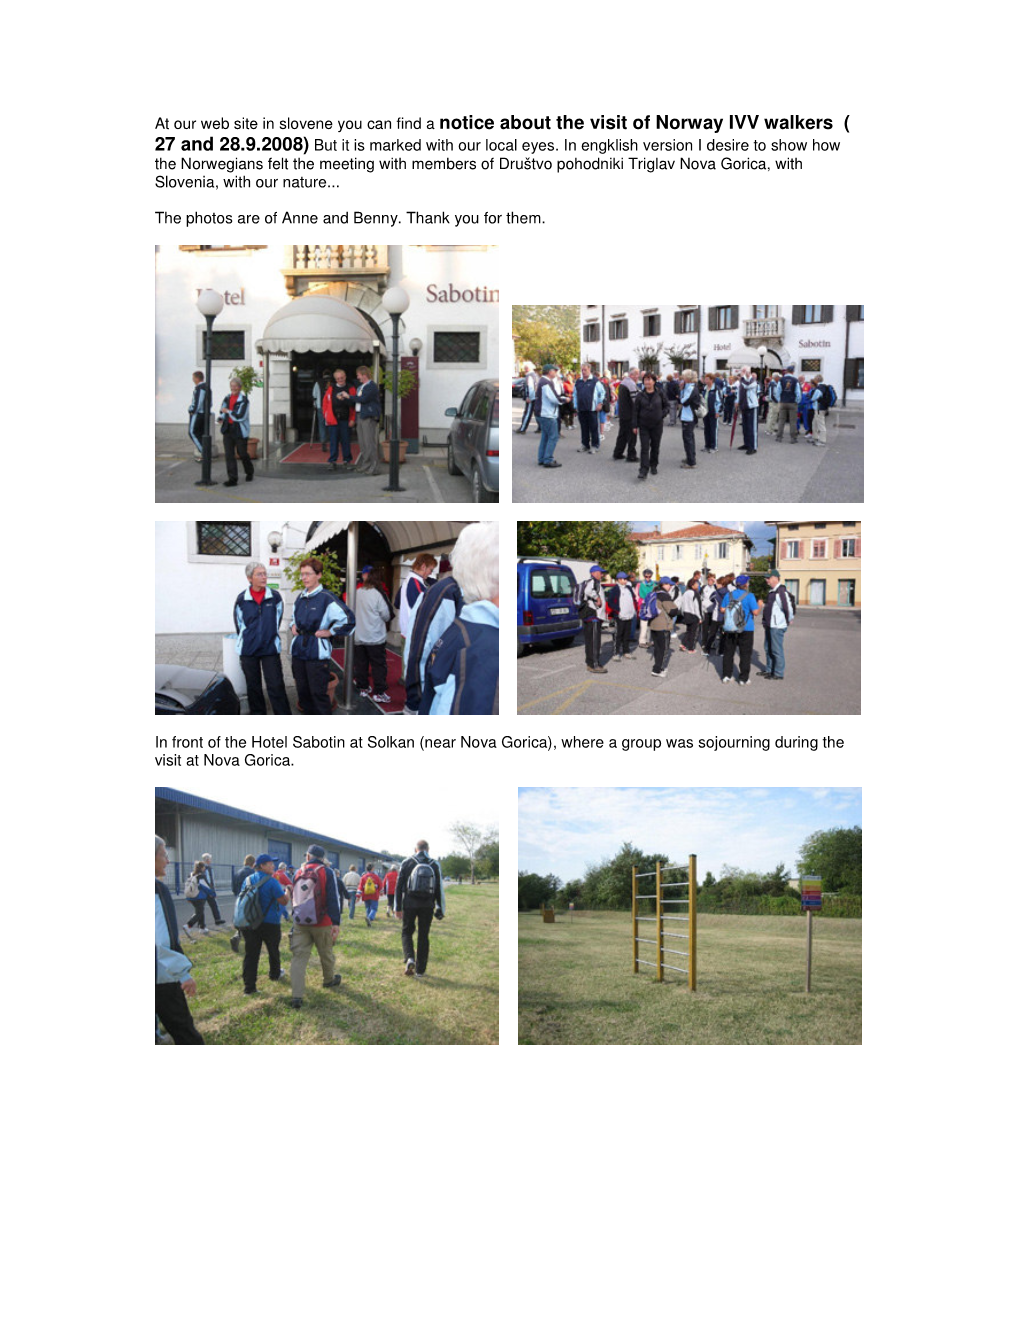 At Our Web Site in Slovene You Can Find a Notice About the Visit of Norway IVV Walkers ( 27 and 28.9.2008) but It Is Marked with Our Local Eyes